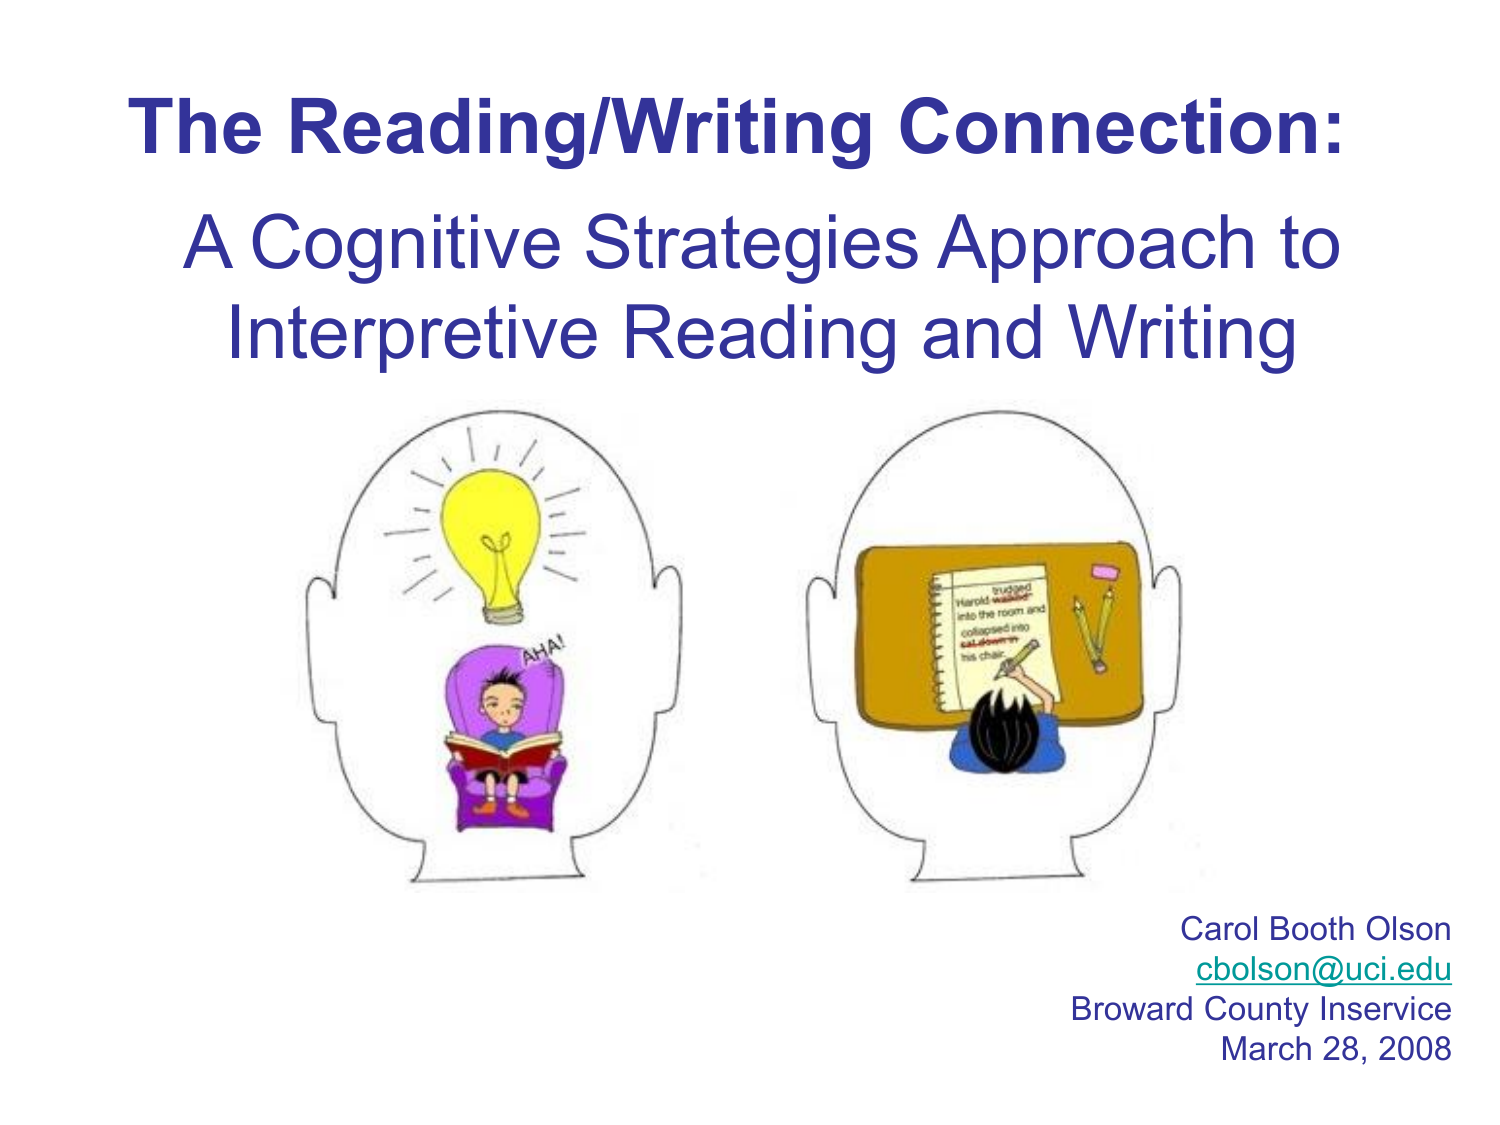 write an essay on the connection between reading and writing